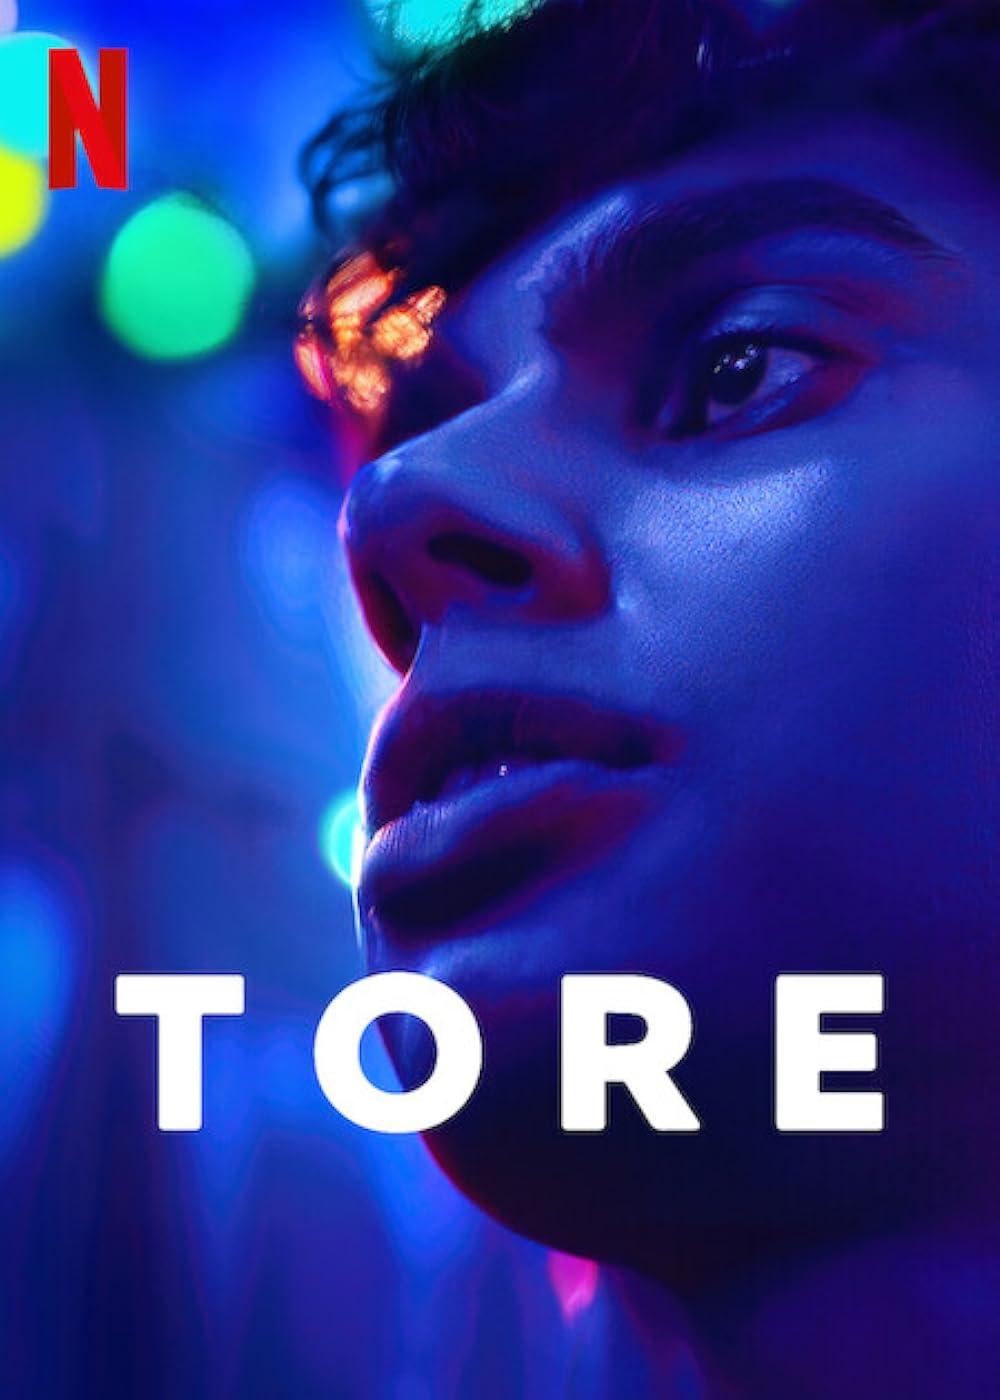 Tore (October 27) - Netflix
Tore unravels the life of 27-year-old Tore, whose world is shattered when his beloved father tragically passes away. By day, he wears a mask of normalcy while managing his responsibilities at his father's funeral home.